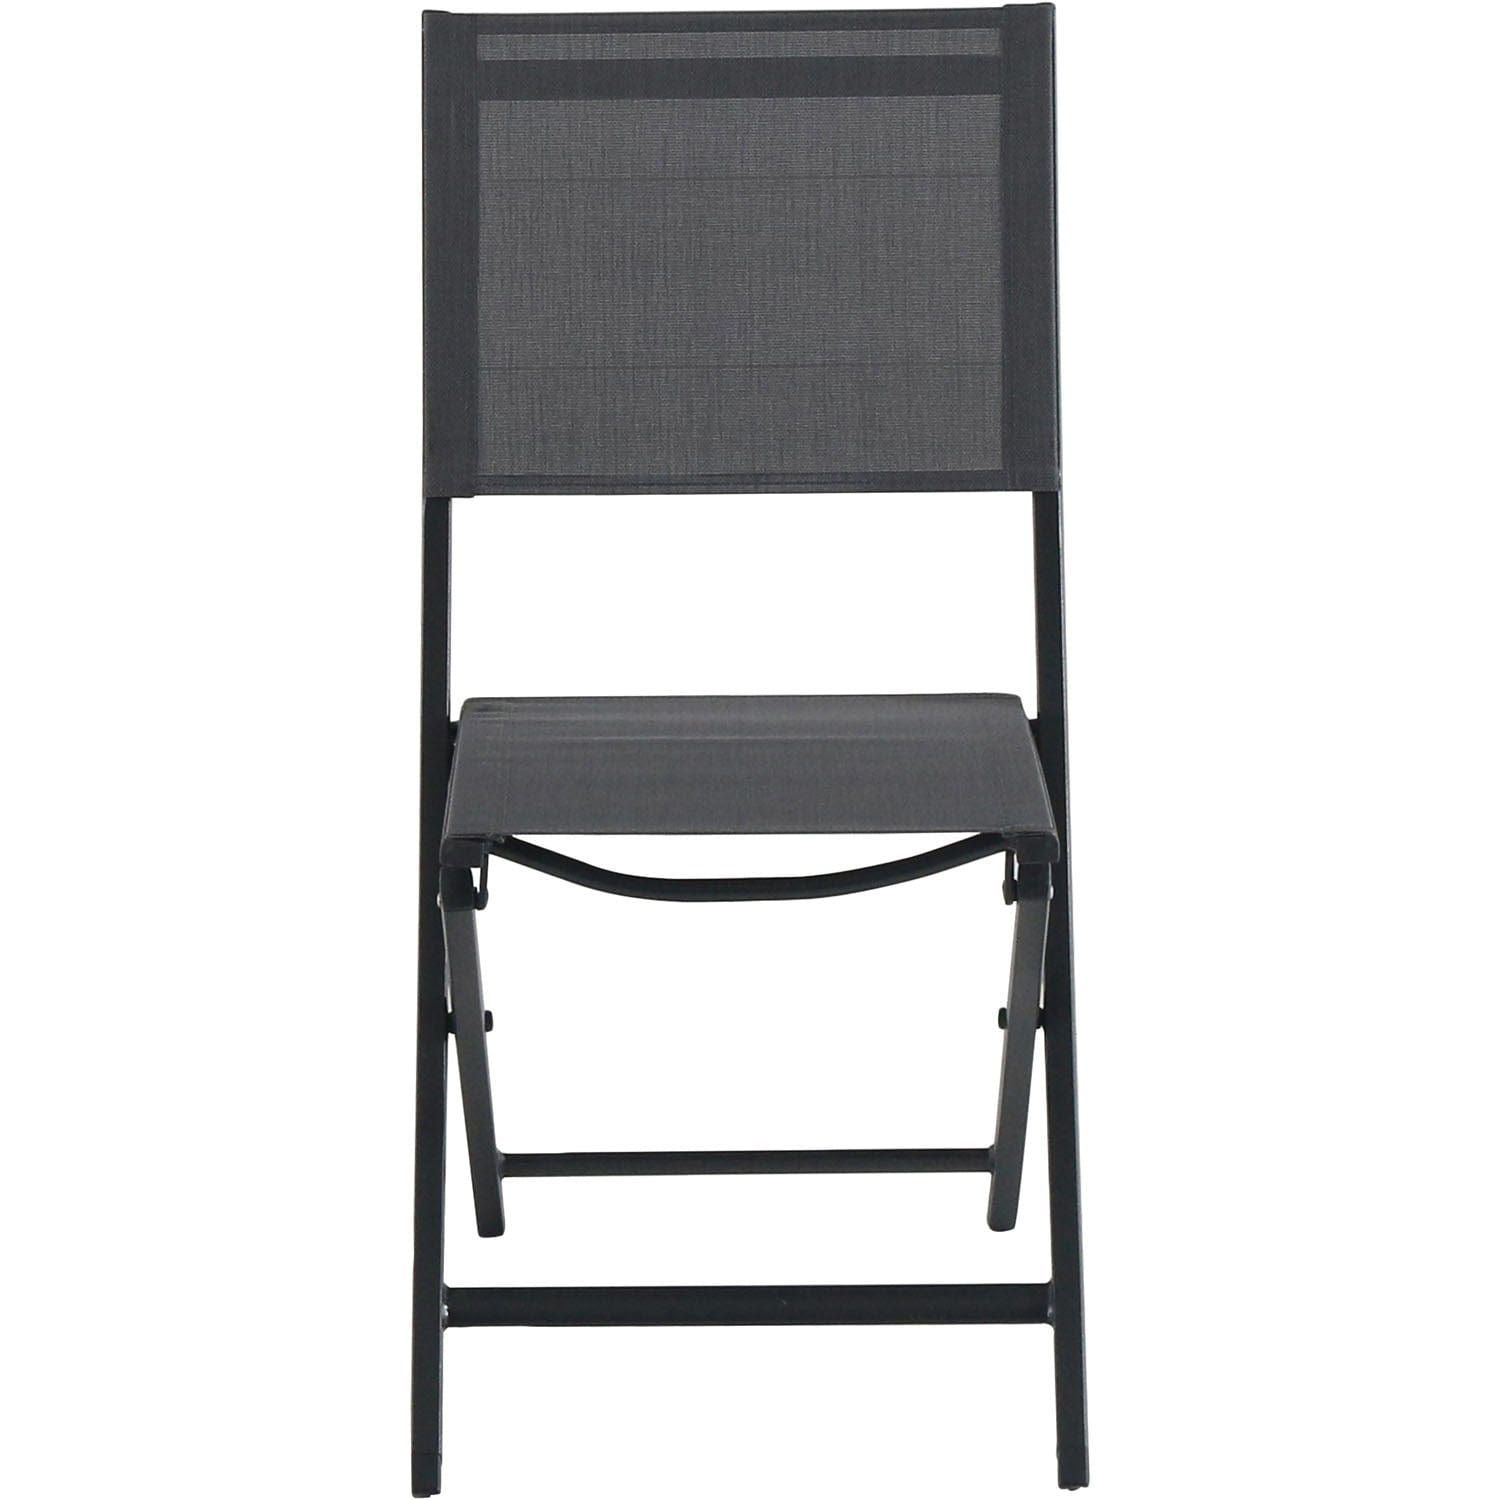 Hanover Outdoor Dining Set Hanover Del Mar 9-Piece Outdoor Dining Set with 8 Folding Sling Chairs in Gray and a White 40" x 118" Expandable Dining Table - DELDN9PCFD-WG